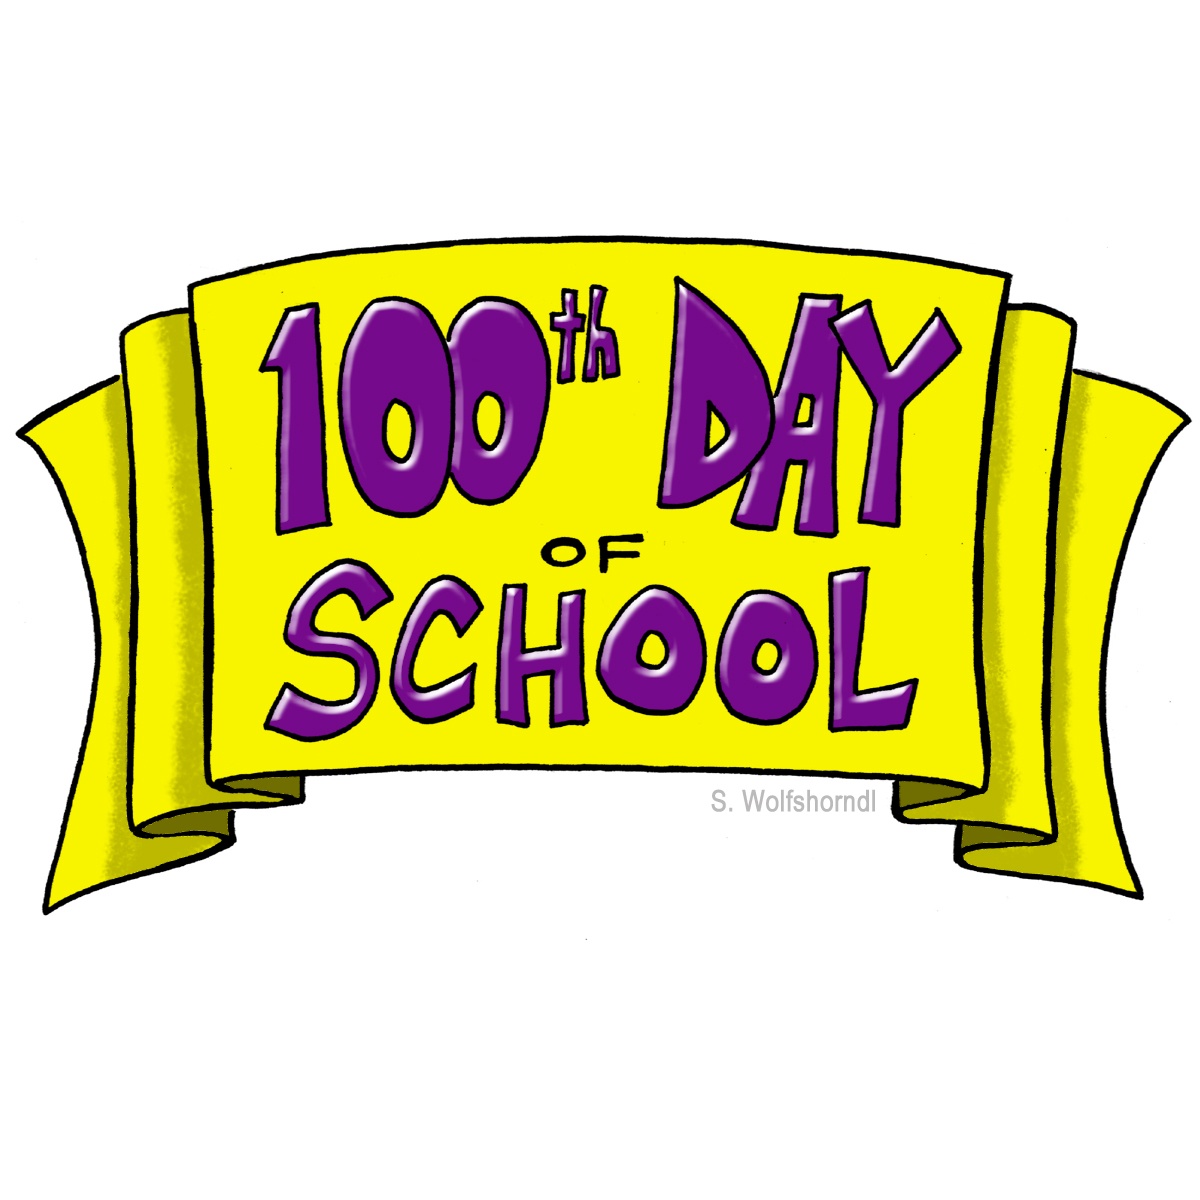 last day of school clipart free - photo #21